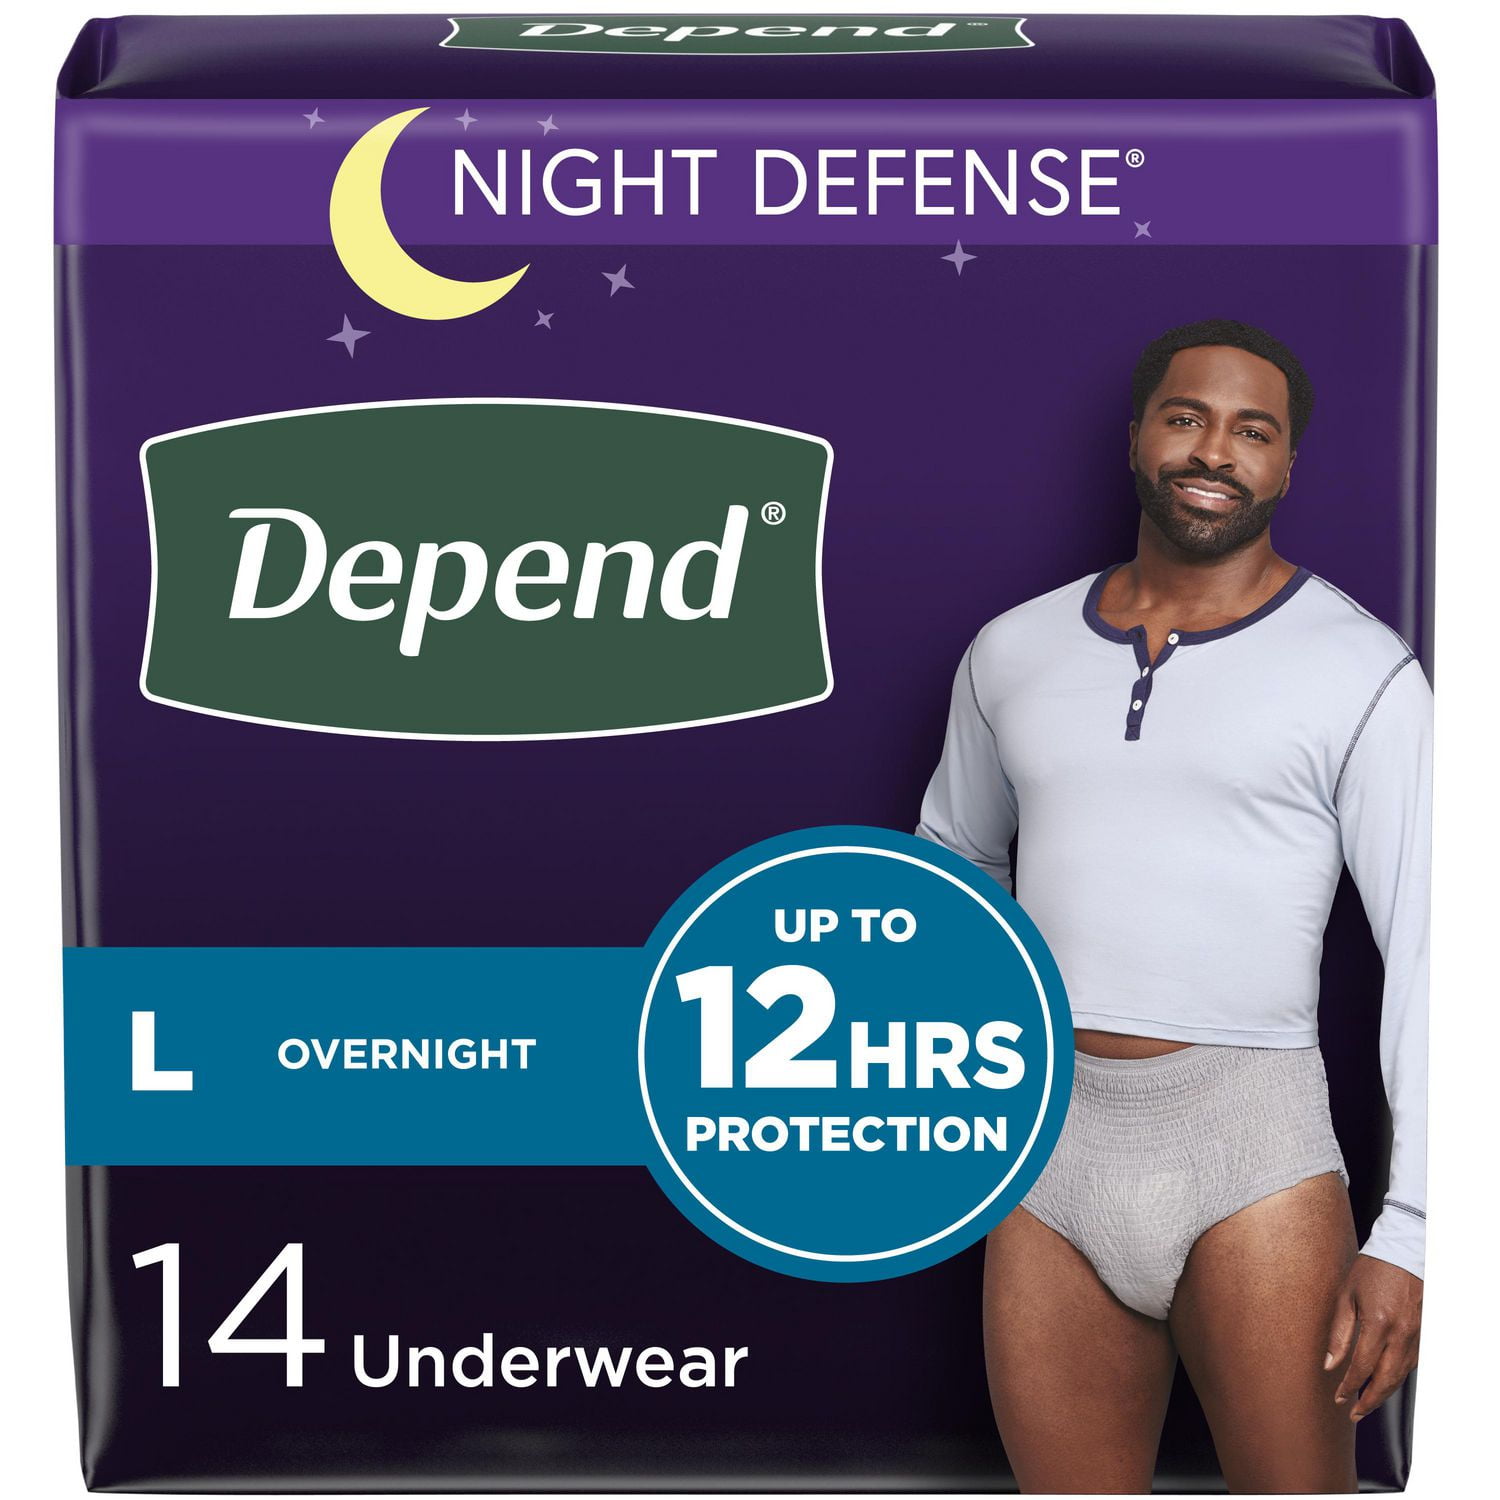 Waterproof Absorbent Incontinence Underwear for Kiddos with Special Needs –  Super Undies